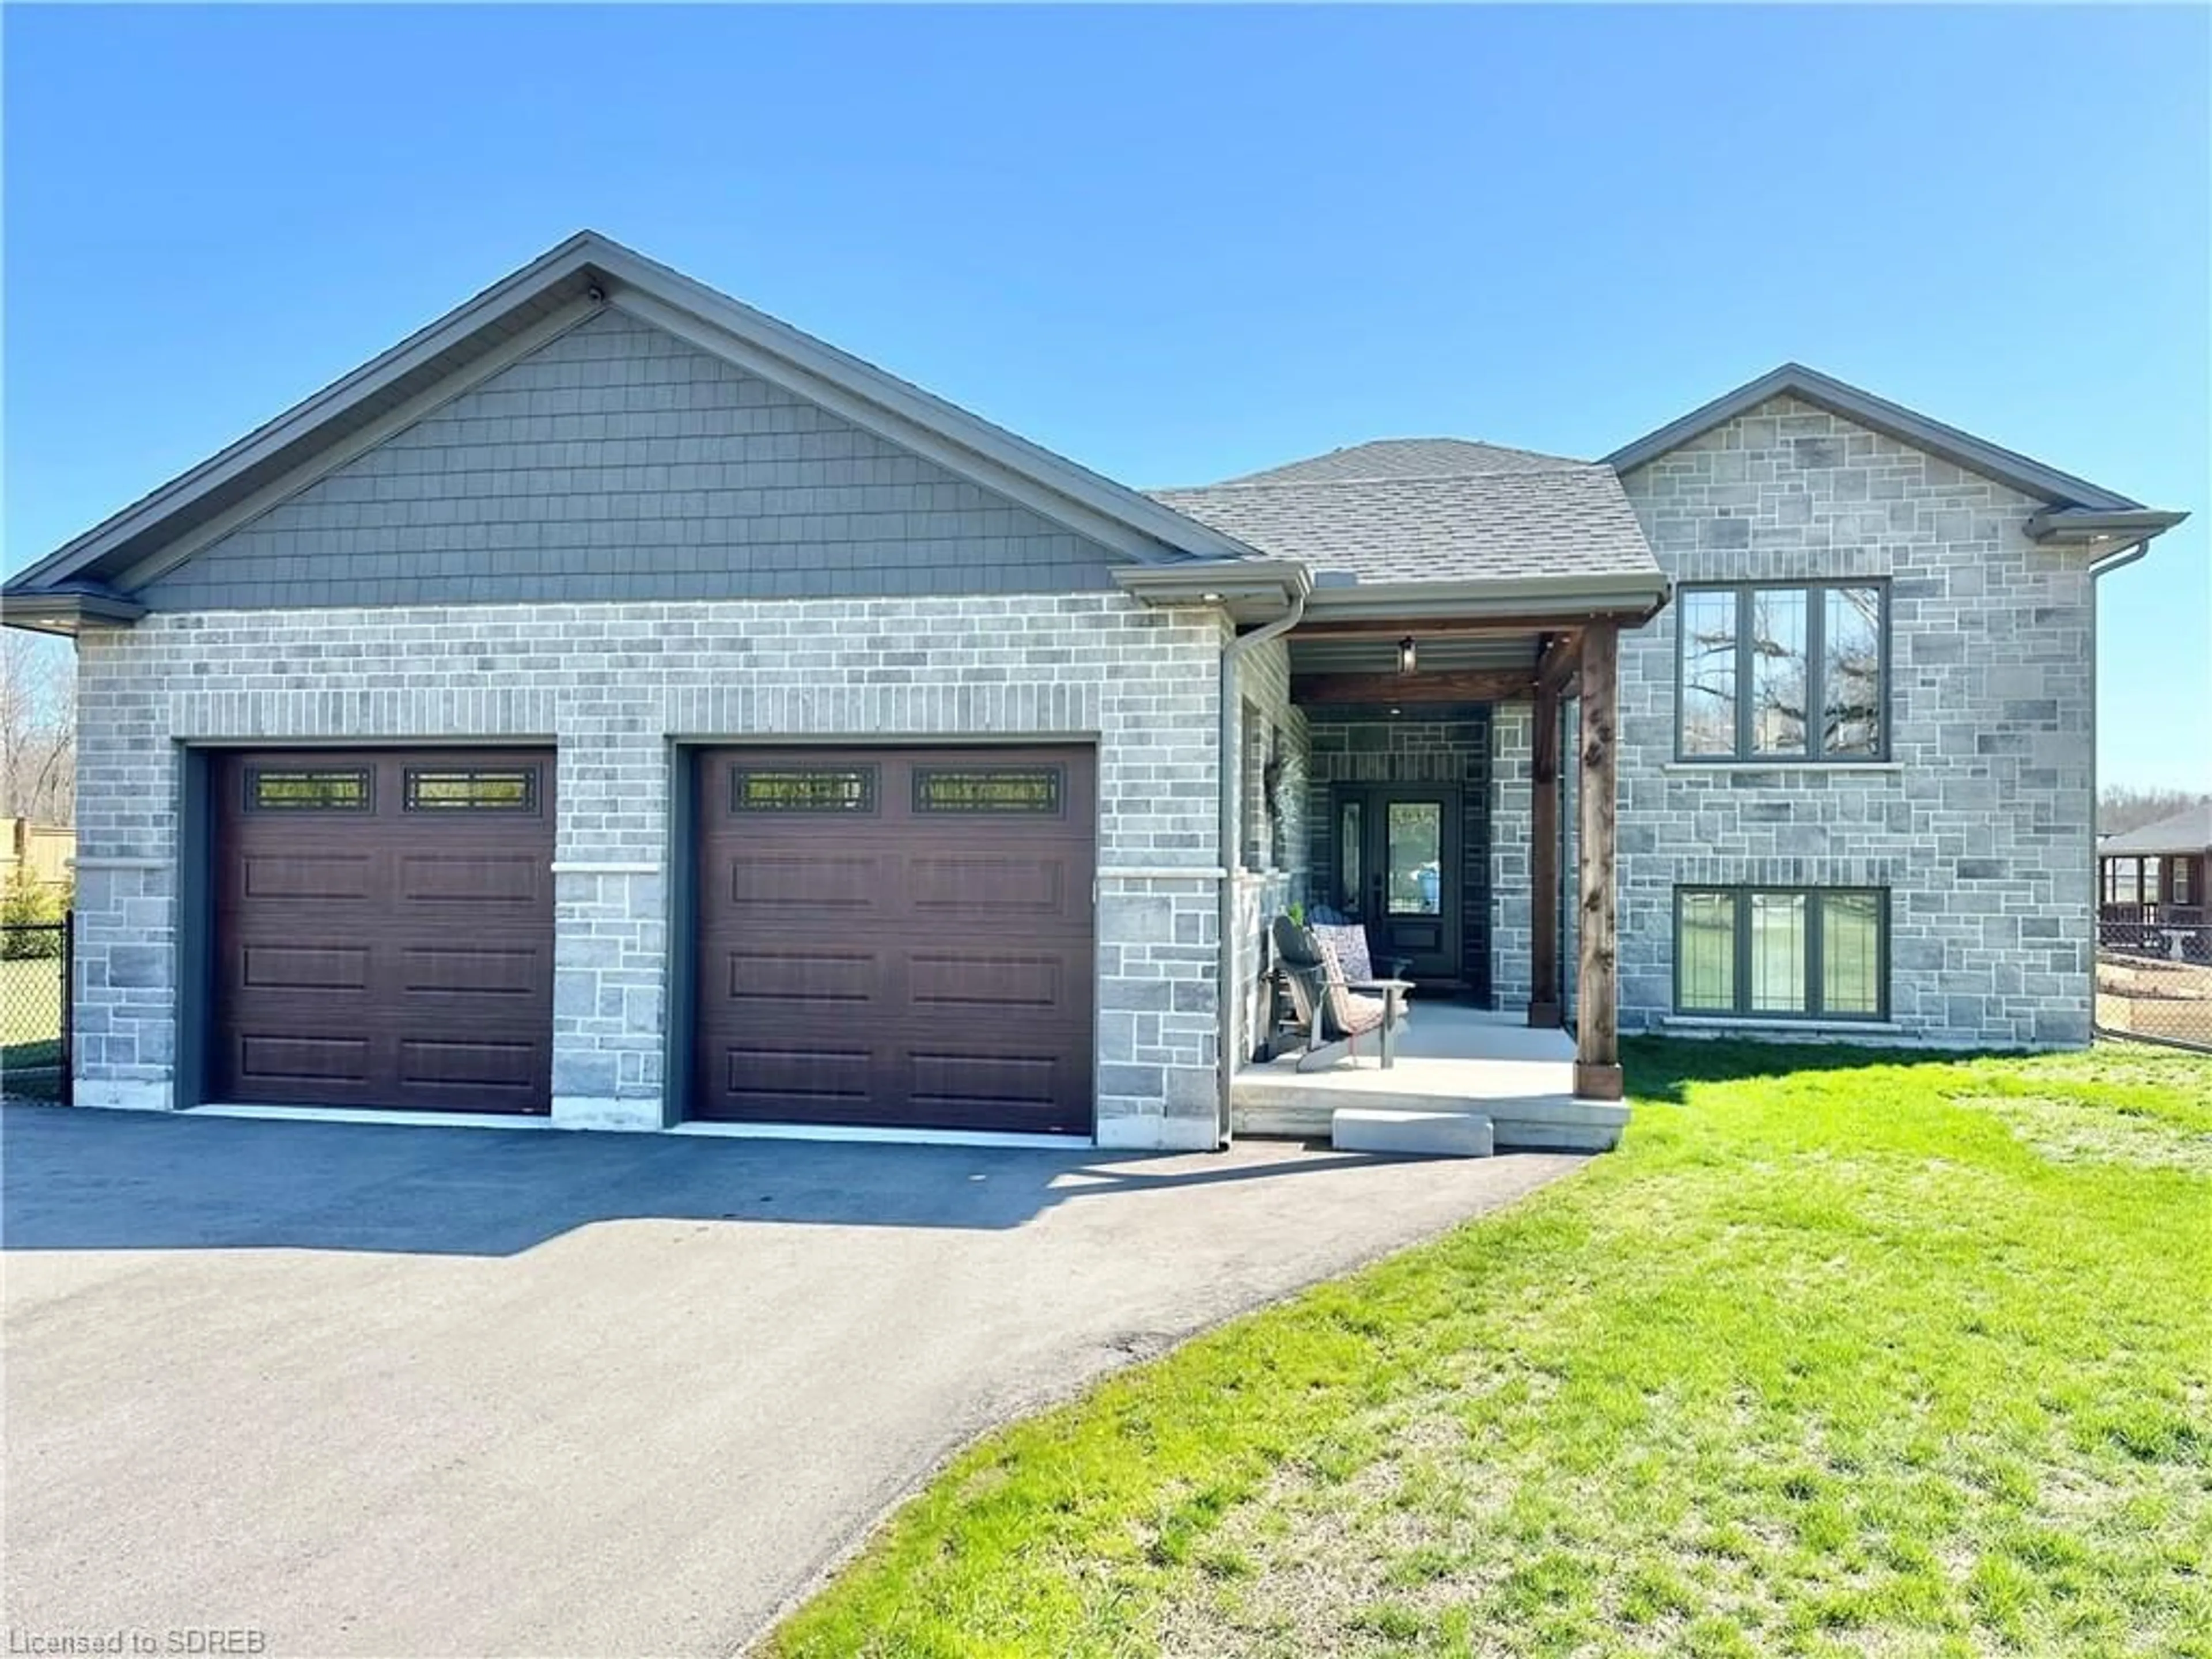 Home with brick exterior material for 1916 Turkey Point Rd, Simcoe Ontario N3Y 4J9